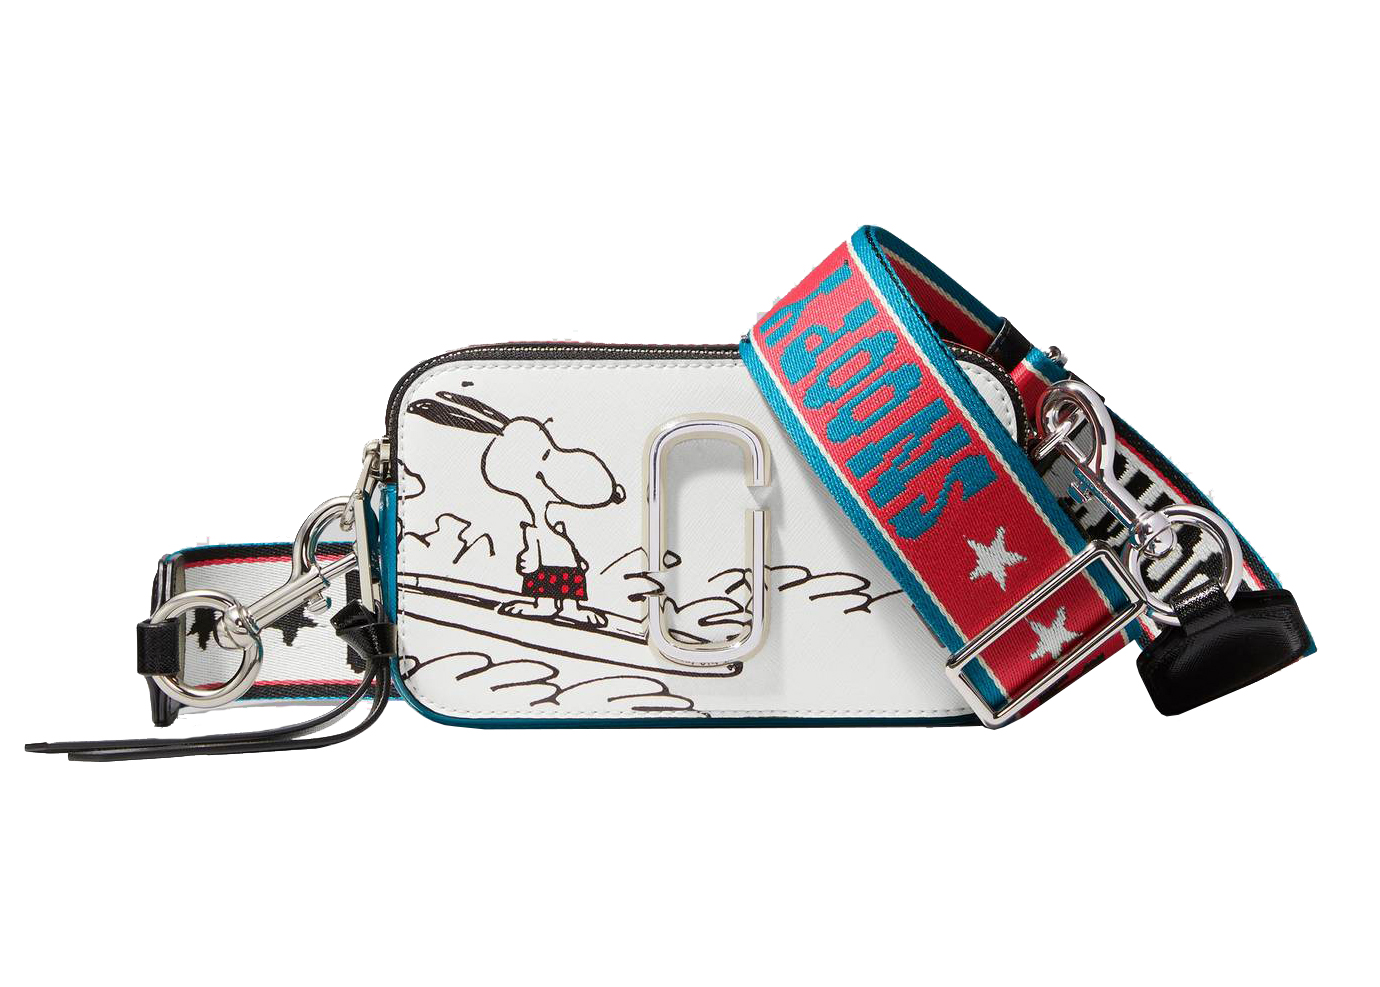 Marc Jacobs x PEANUTS The Snapshot White Multi in Saffiano Leather